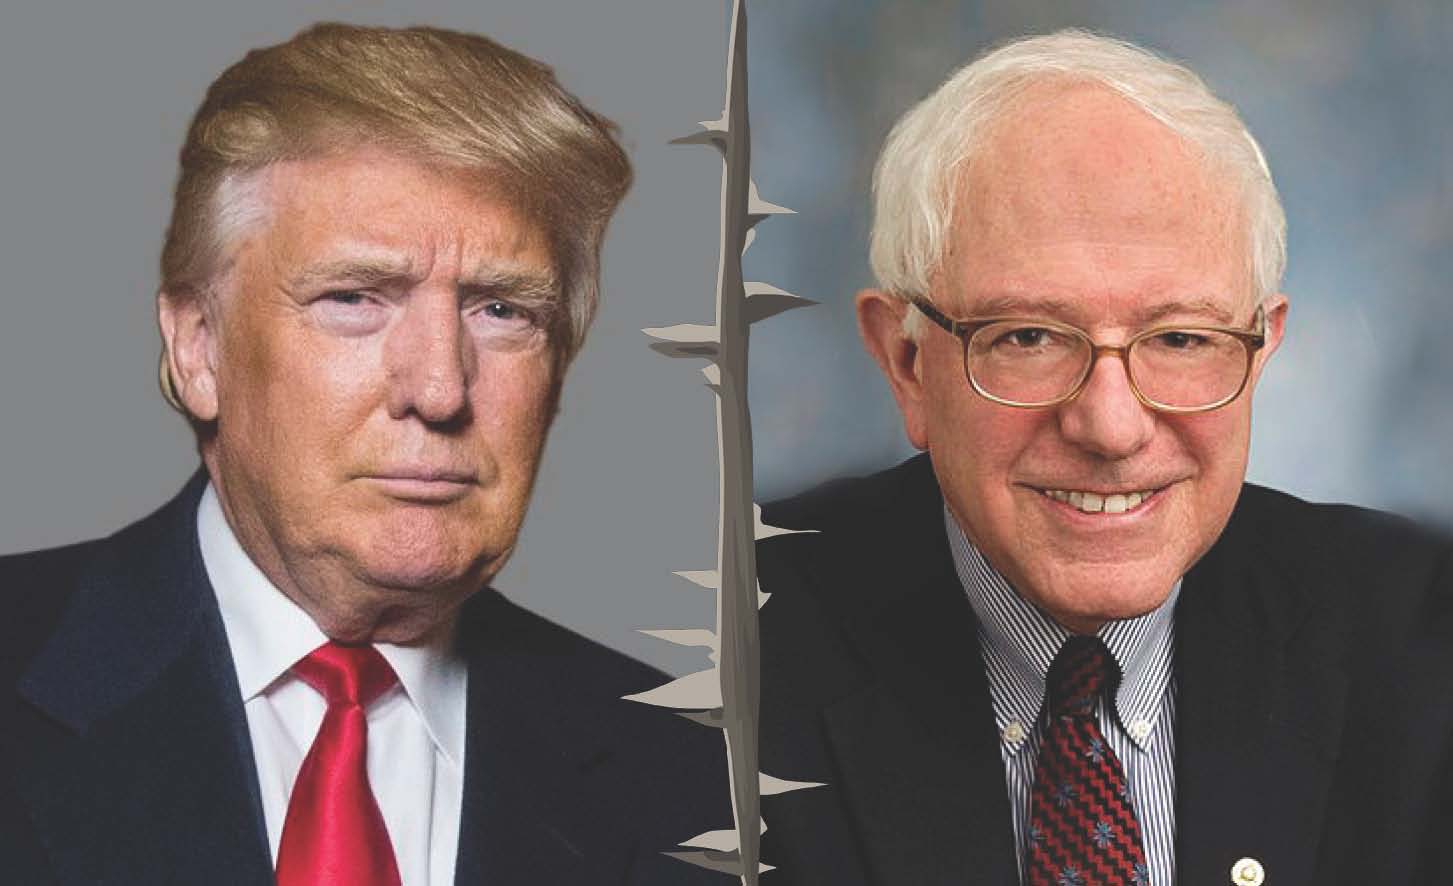 Trump vs. Sanders: Measuring How Divided We Are